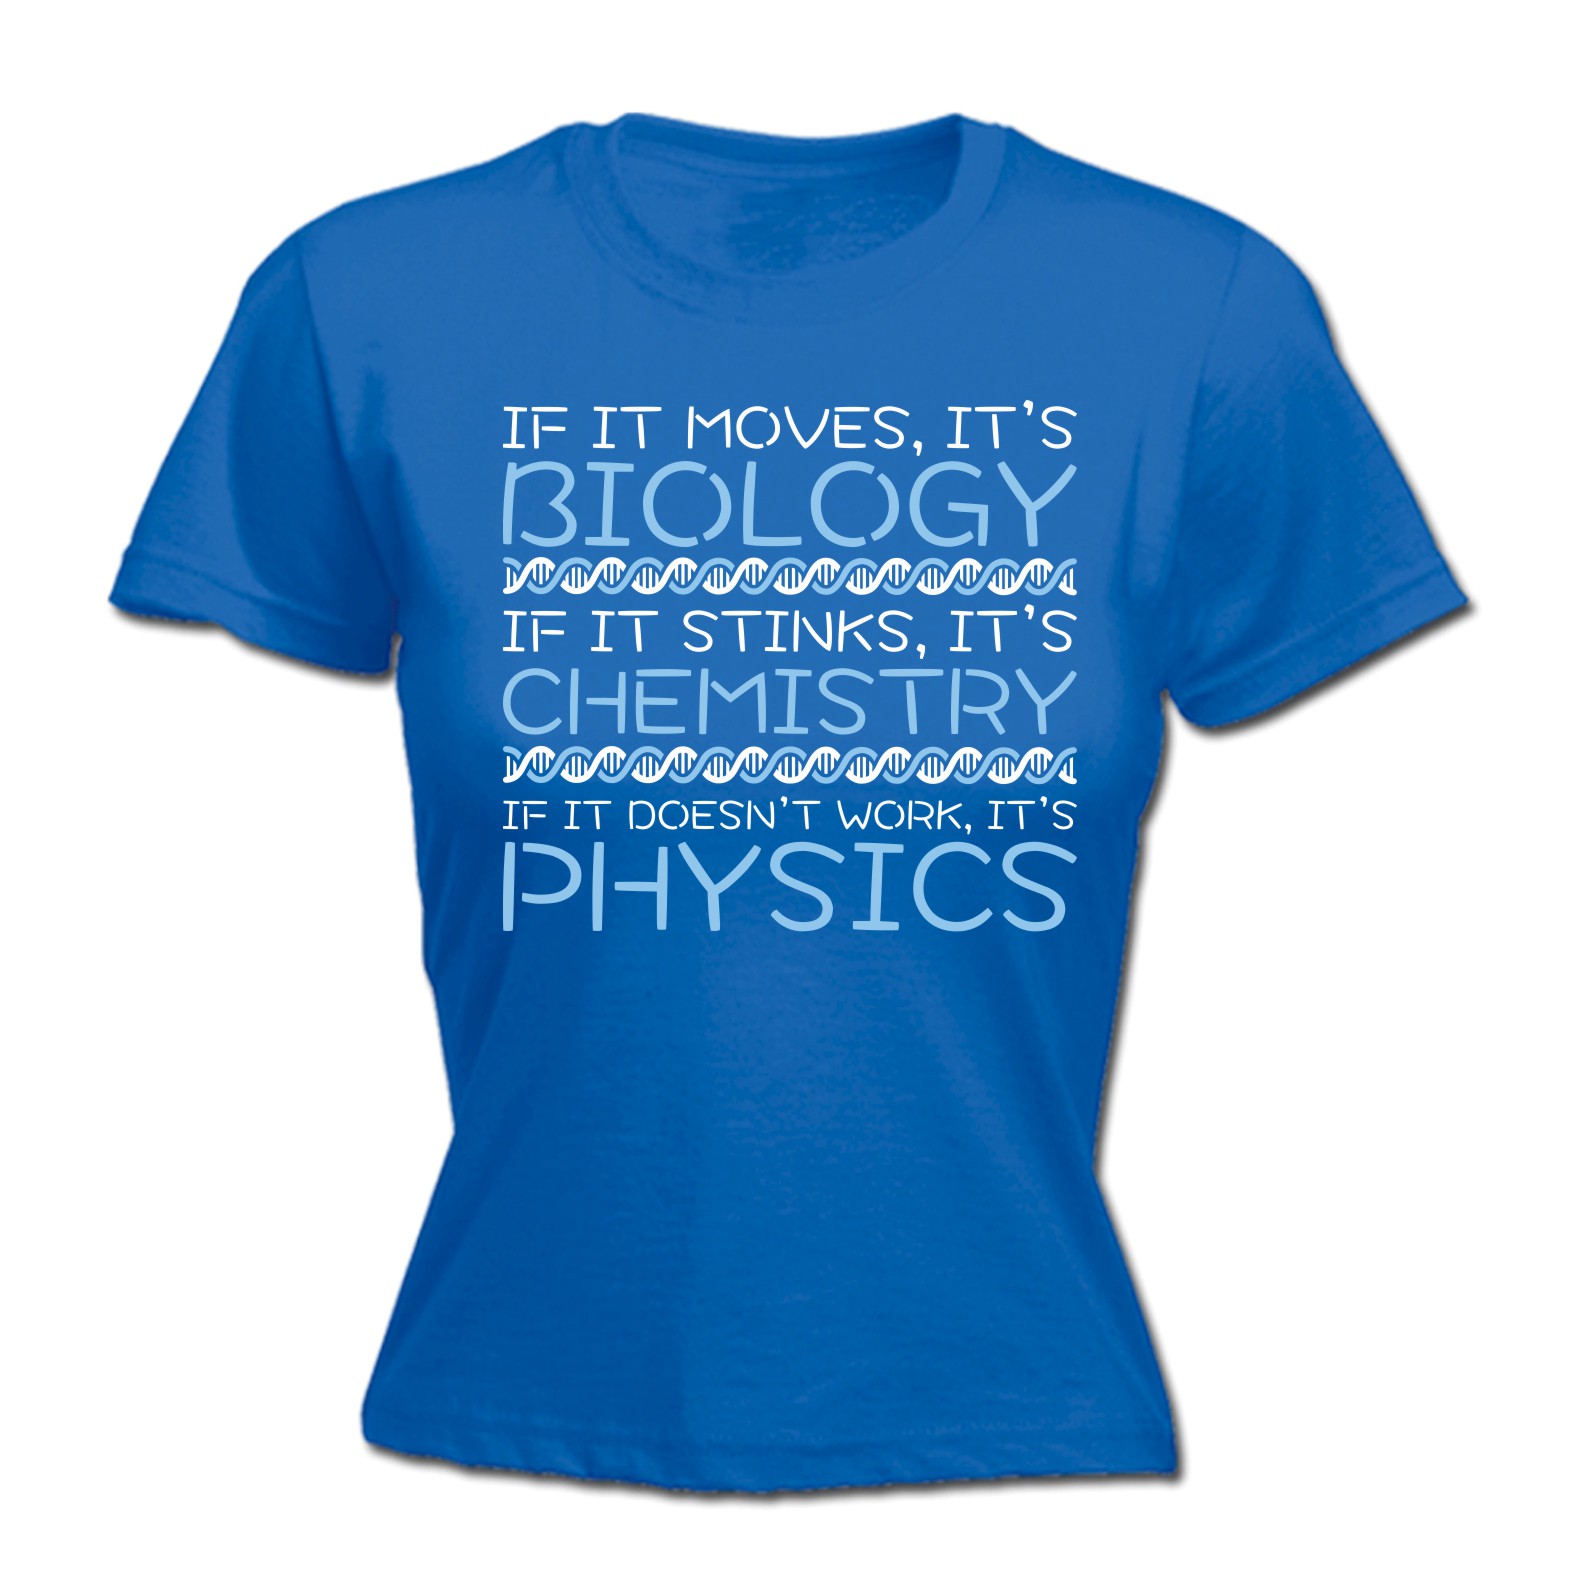 Biology Chemistry Physics Funny Joke Humour Science FITTED T-SHIRT Birthday  Cool | eBay